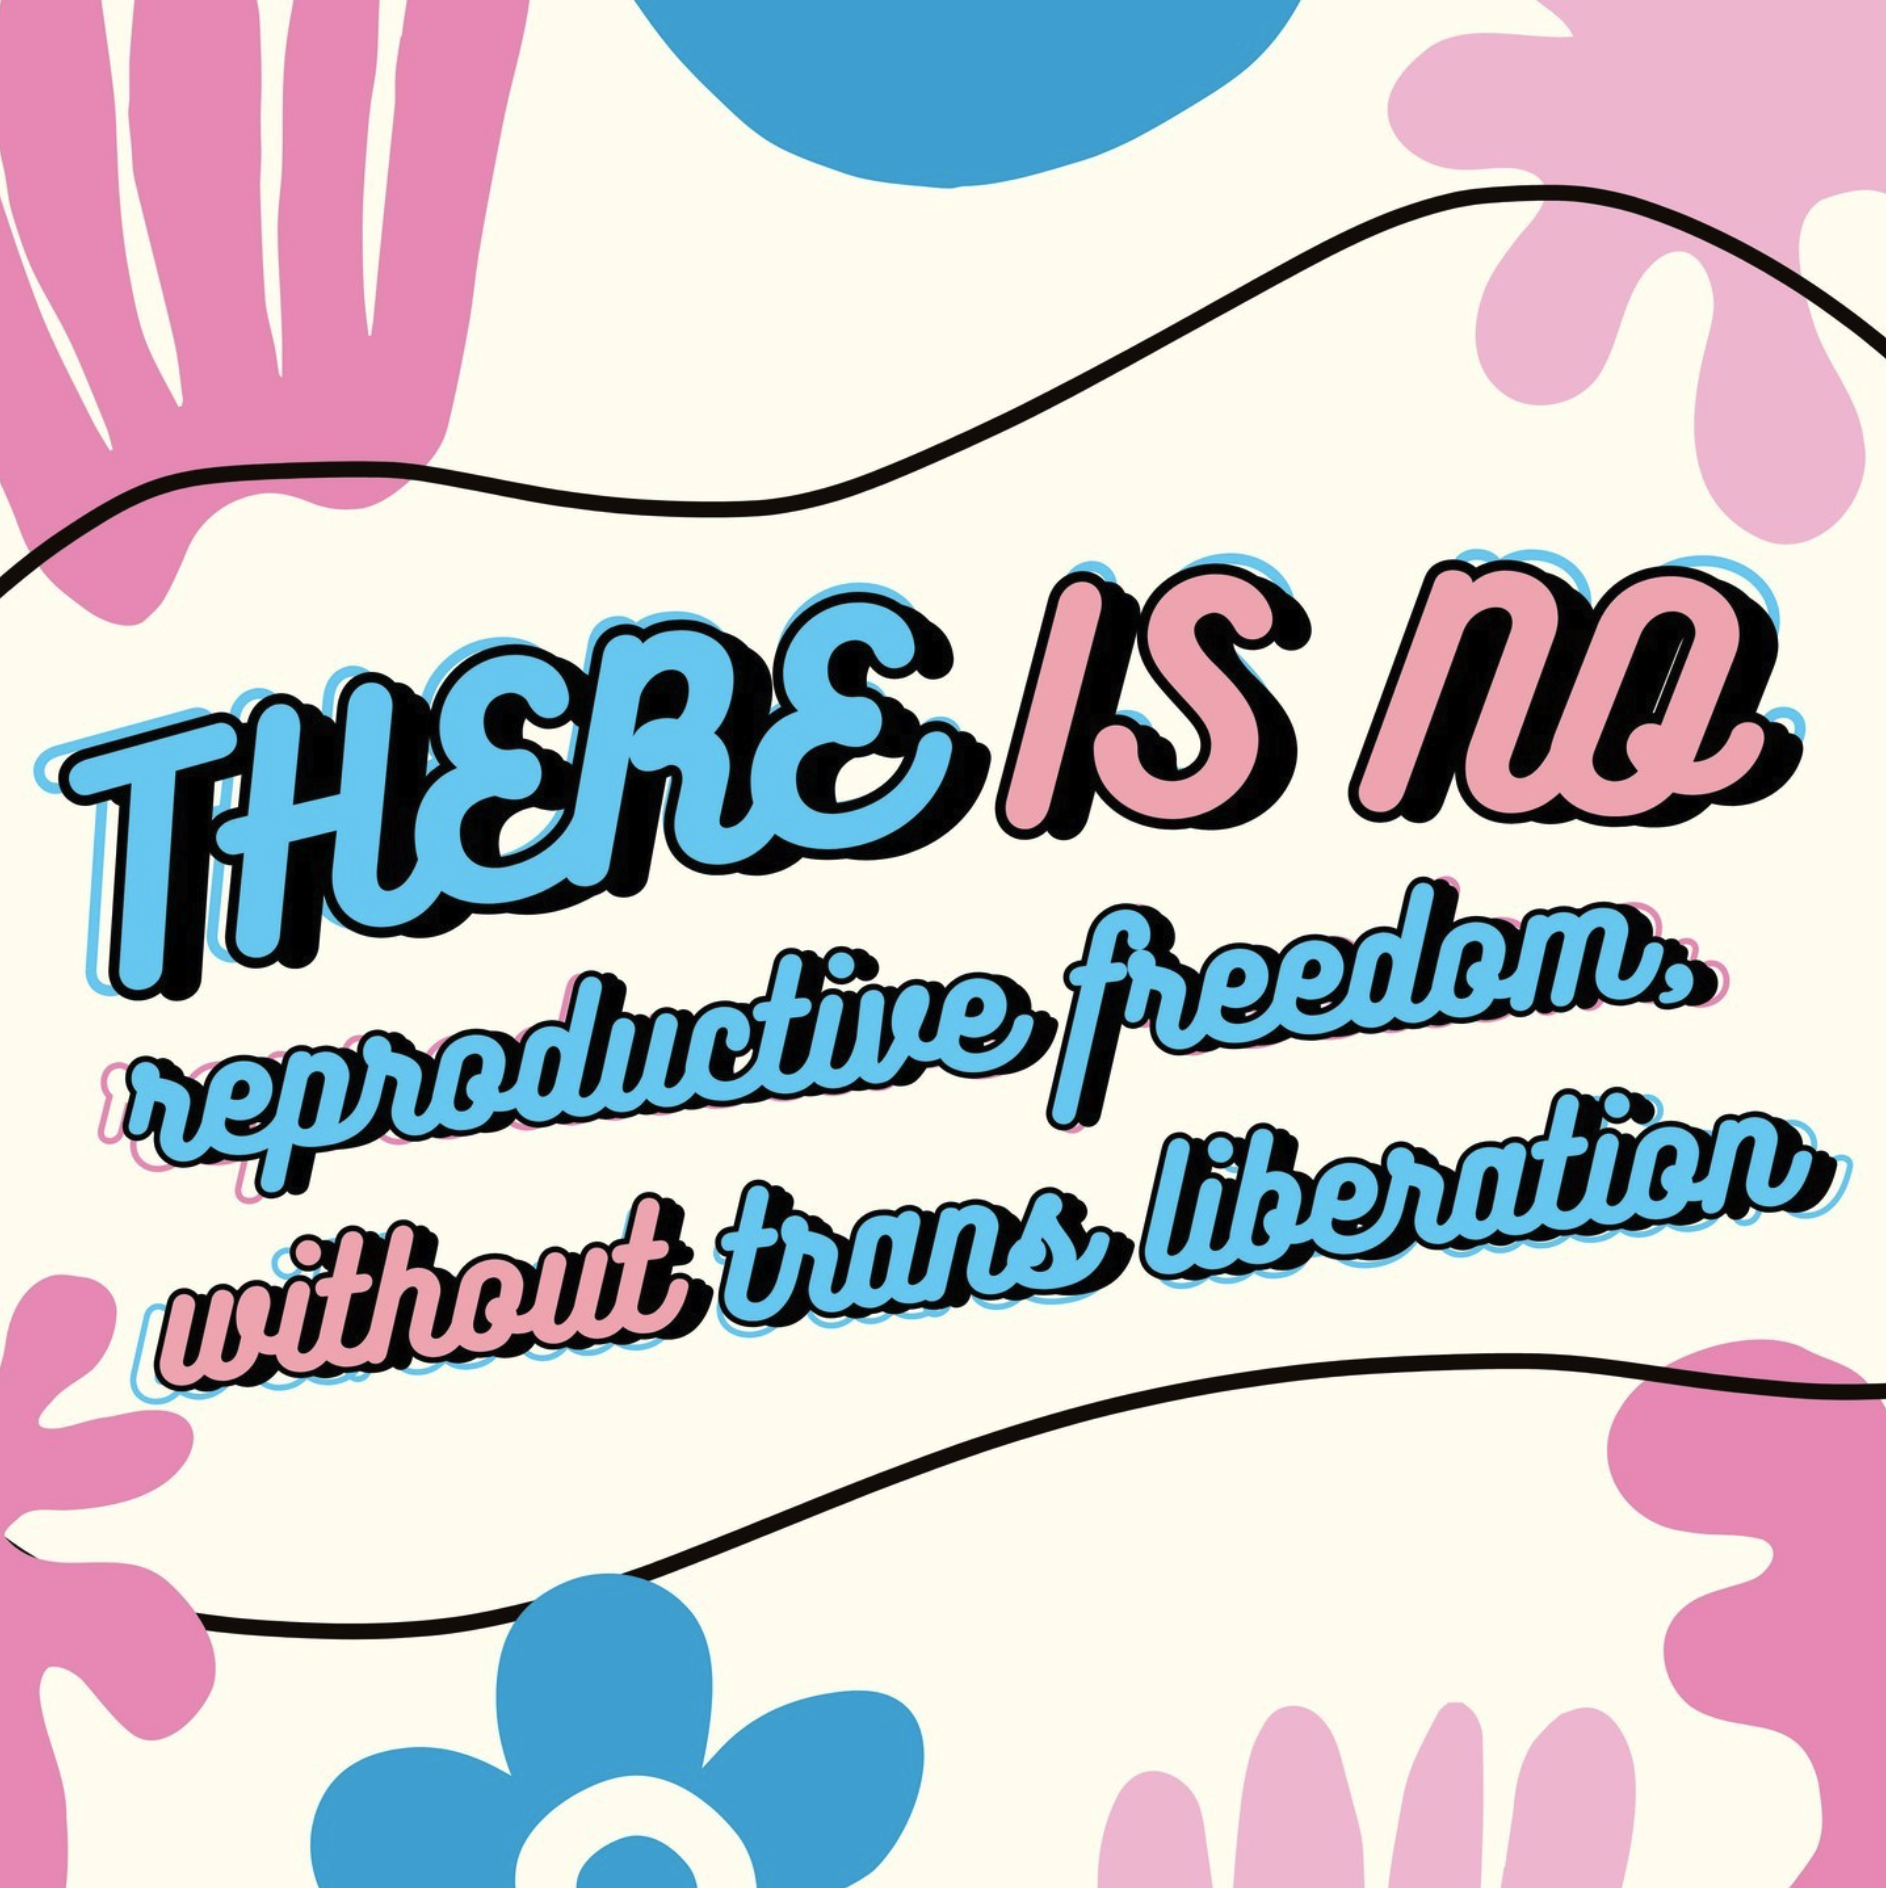 Trans and non-binary people deserve access to the full spectrum of reproductive health care — including abortion, gender-affirming care, family planning and fertility services, and contraception.